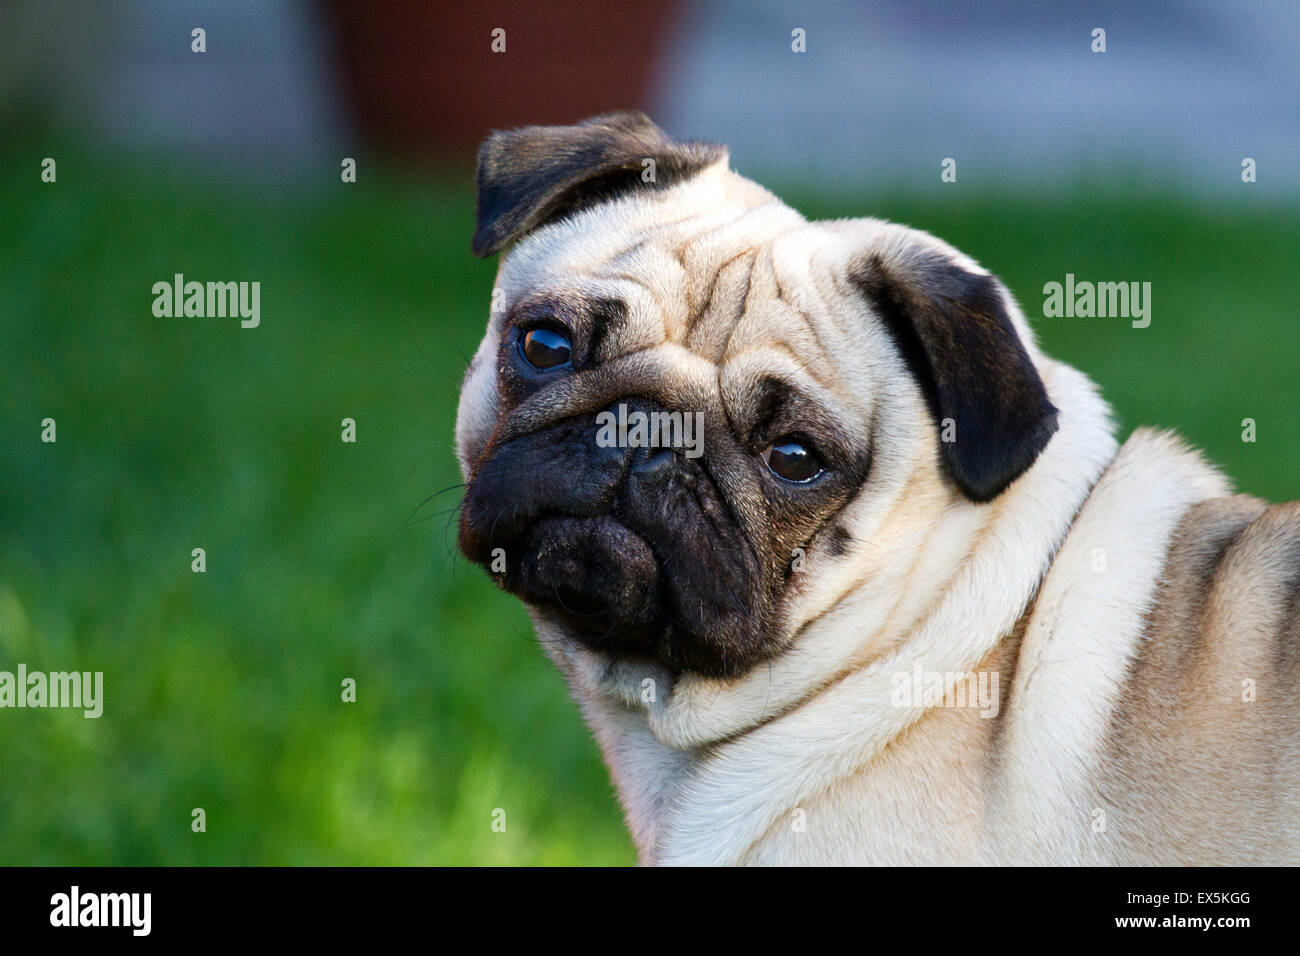 Portrait of cute pet white Pug dog with doleful face, squished little faces, buggy eyes, wrinkly canine in Southport, Merseyside, UK Stock Photo